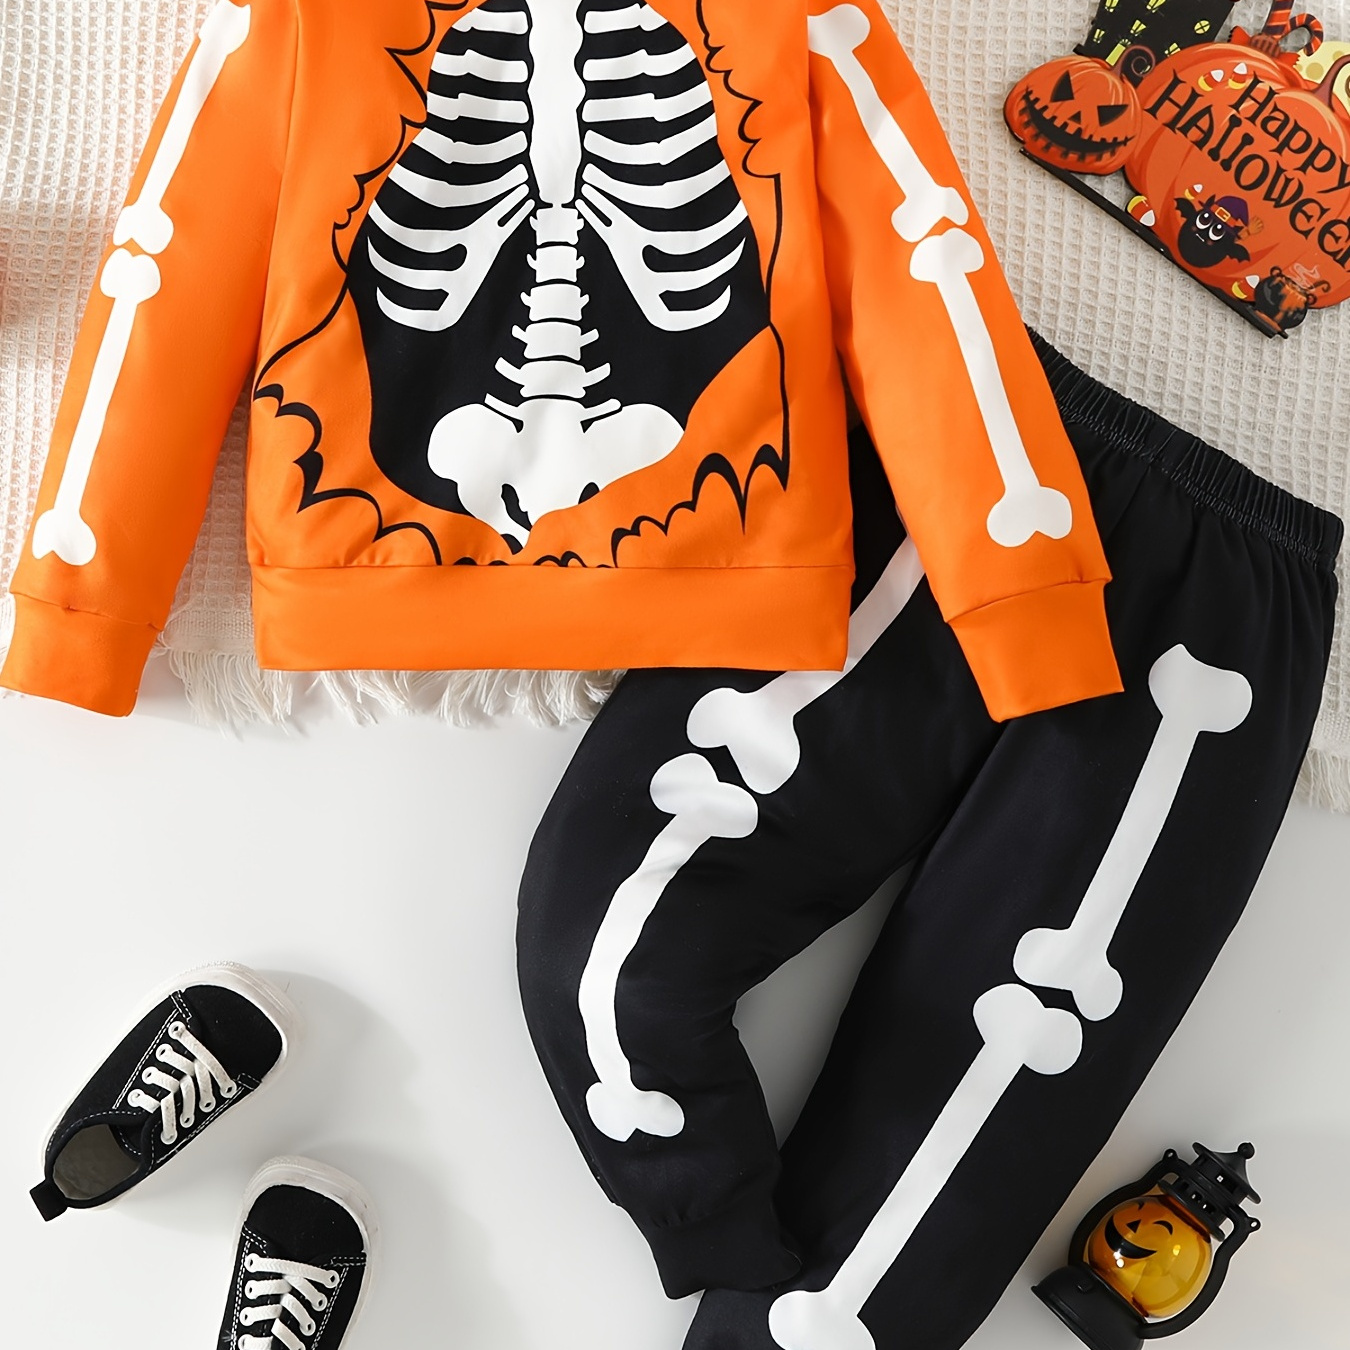 

Skeleton Pattern Toddler Boy's 2pcs, Sweatshirt & Sweatpants Set, Casual Halloween Outfits, Kids Clothes For Spring Fall